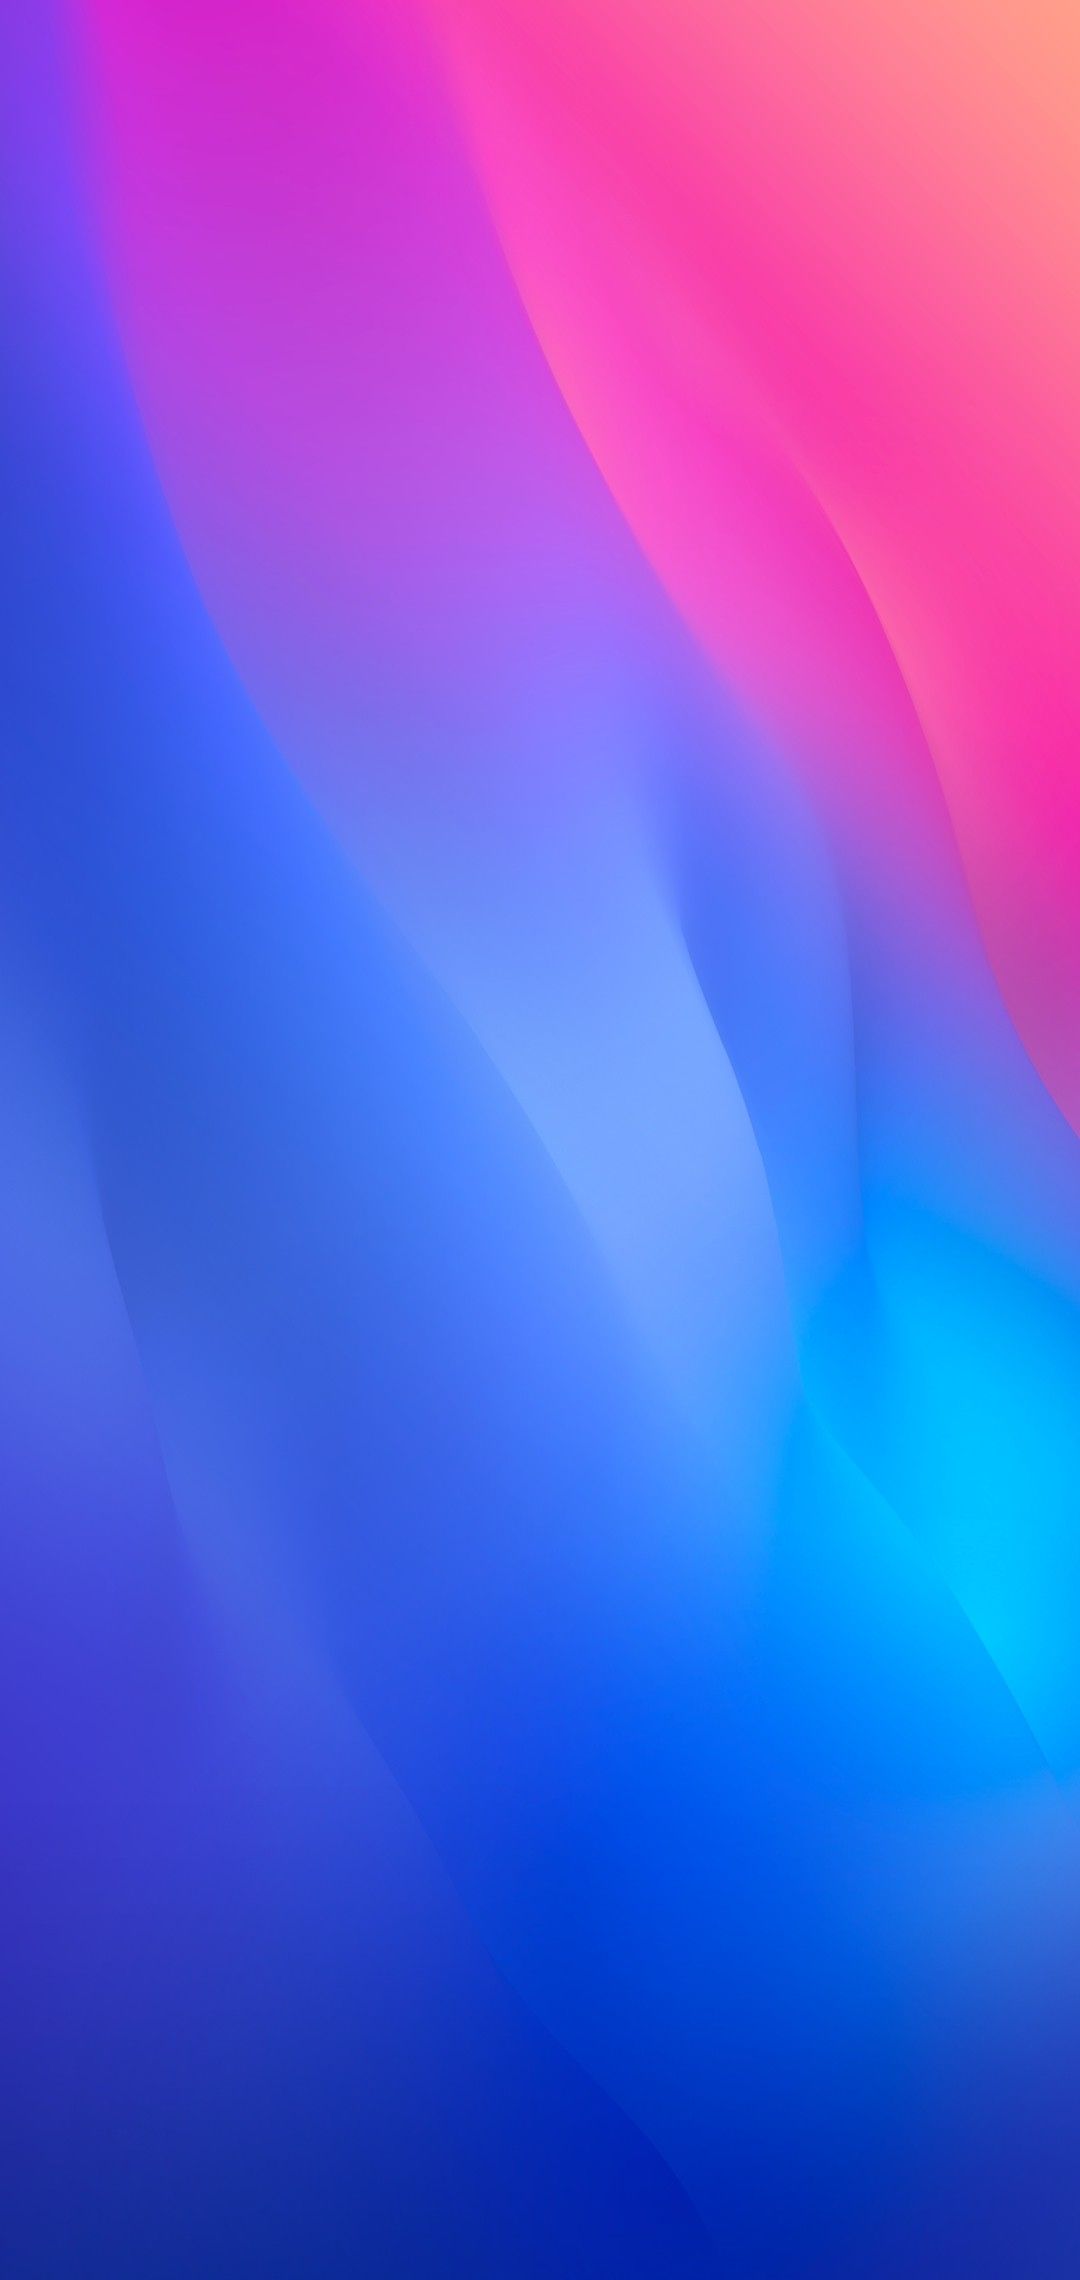 Free download iOS 12 iPhone X blue pink clean simple abstract